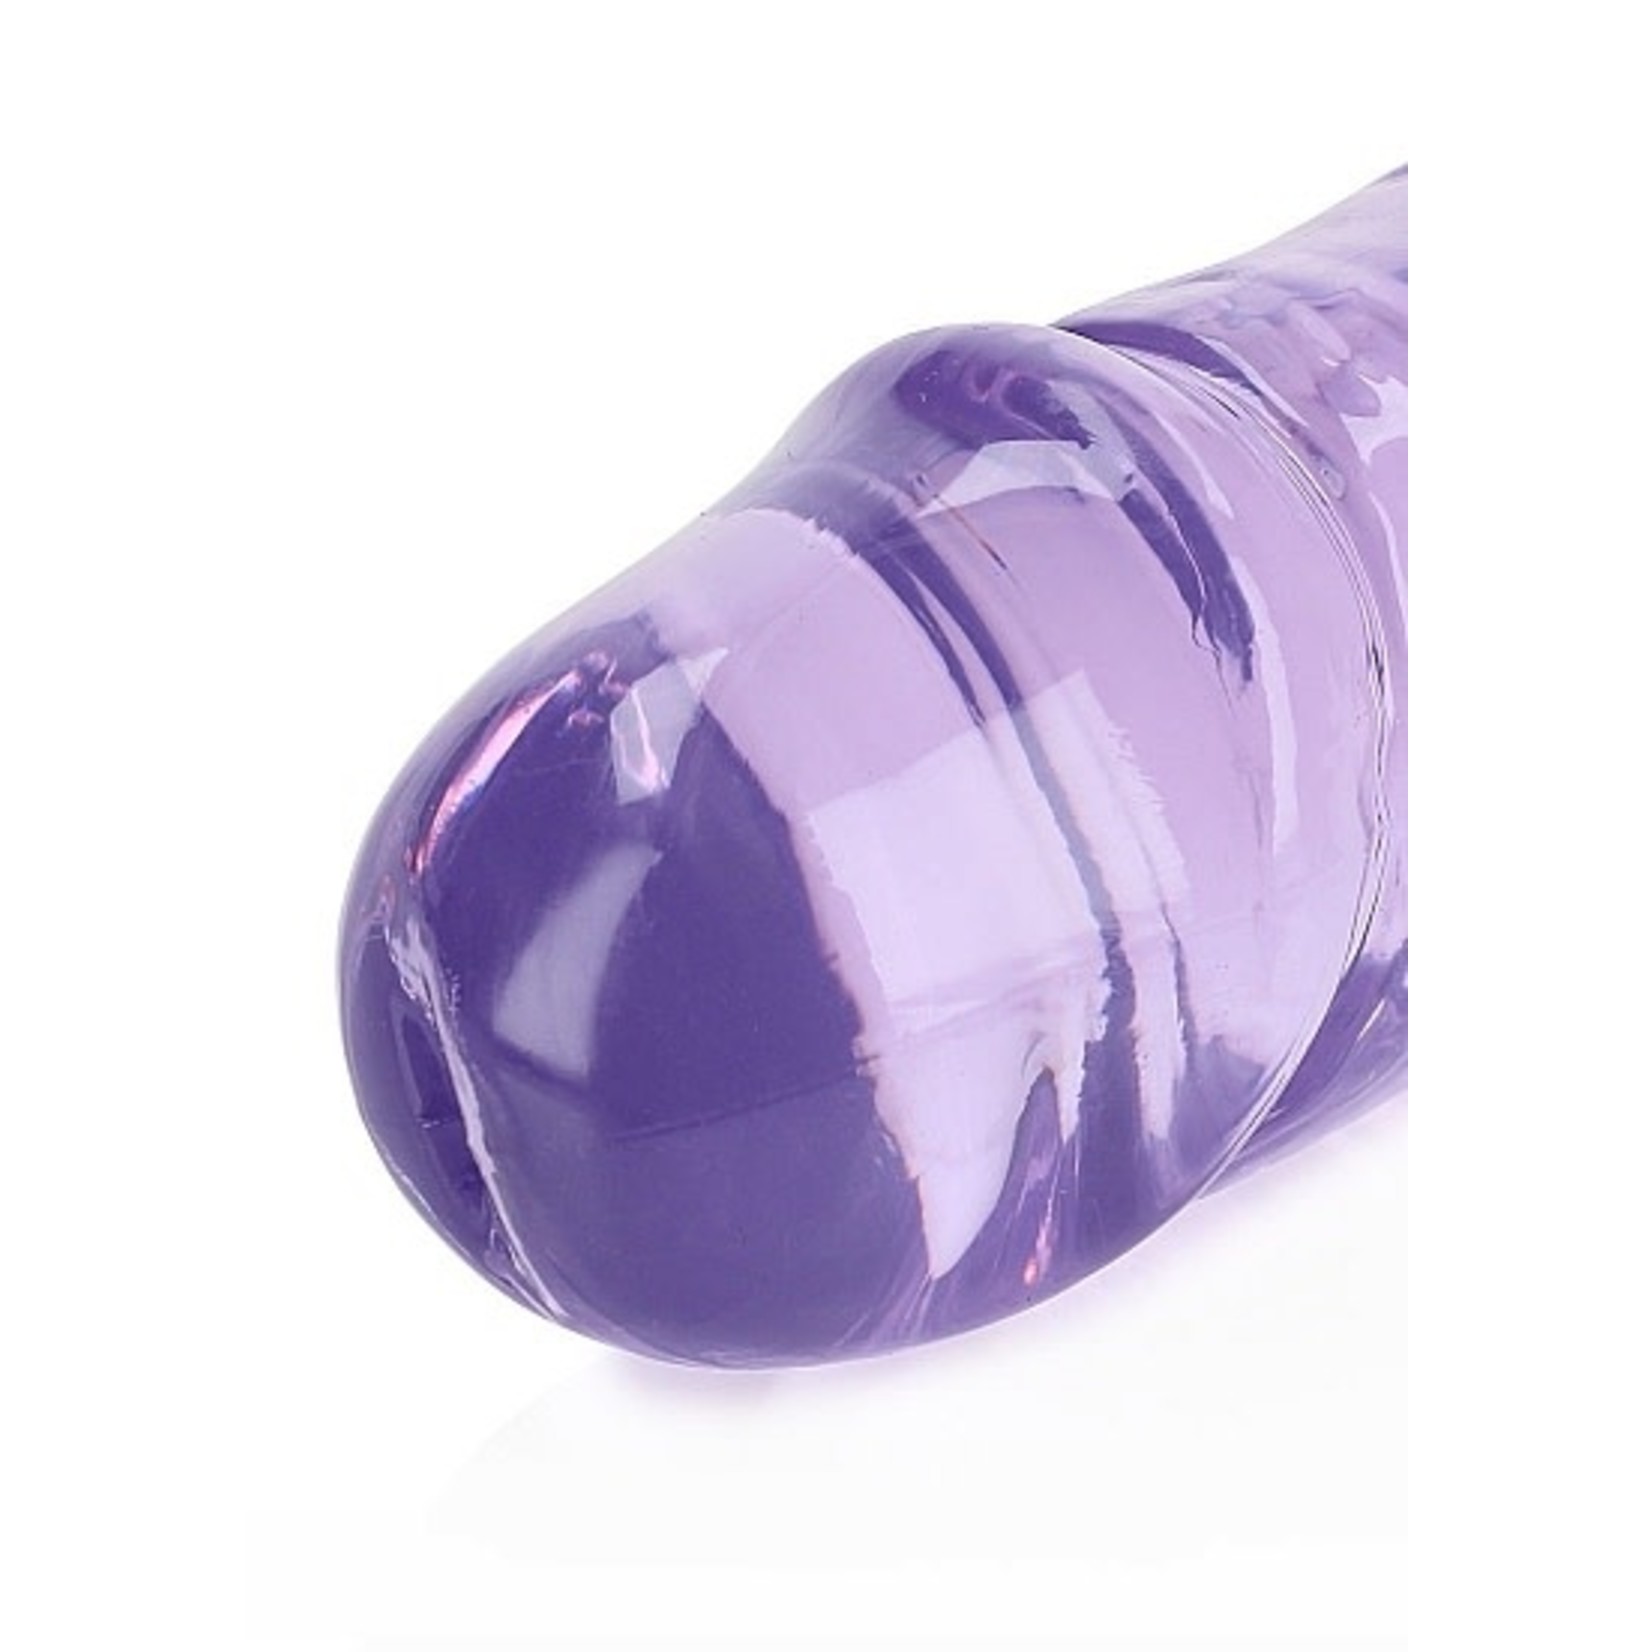 SHOTS REALROCK CRYSTAL CLEAR JELLY 13 INCH DOUBLE DILDO